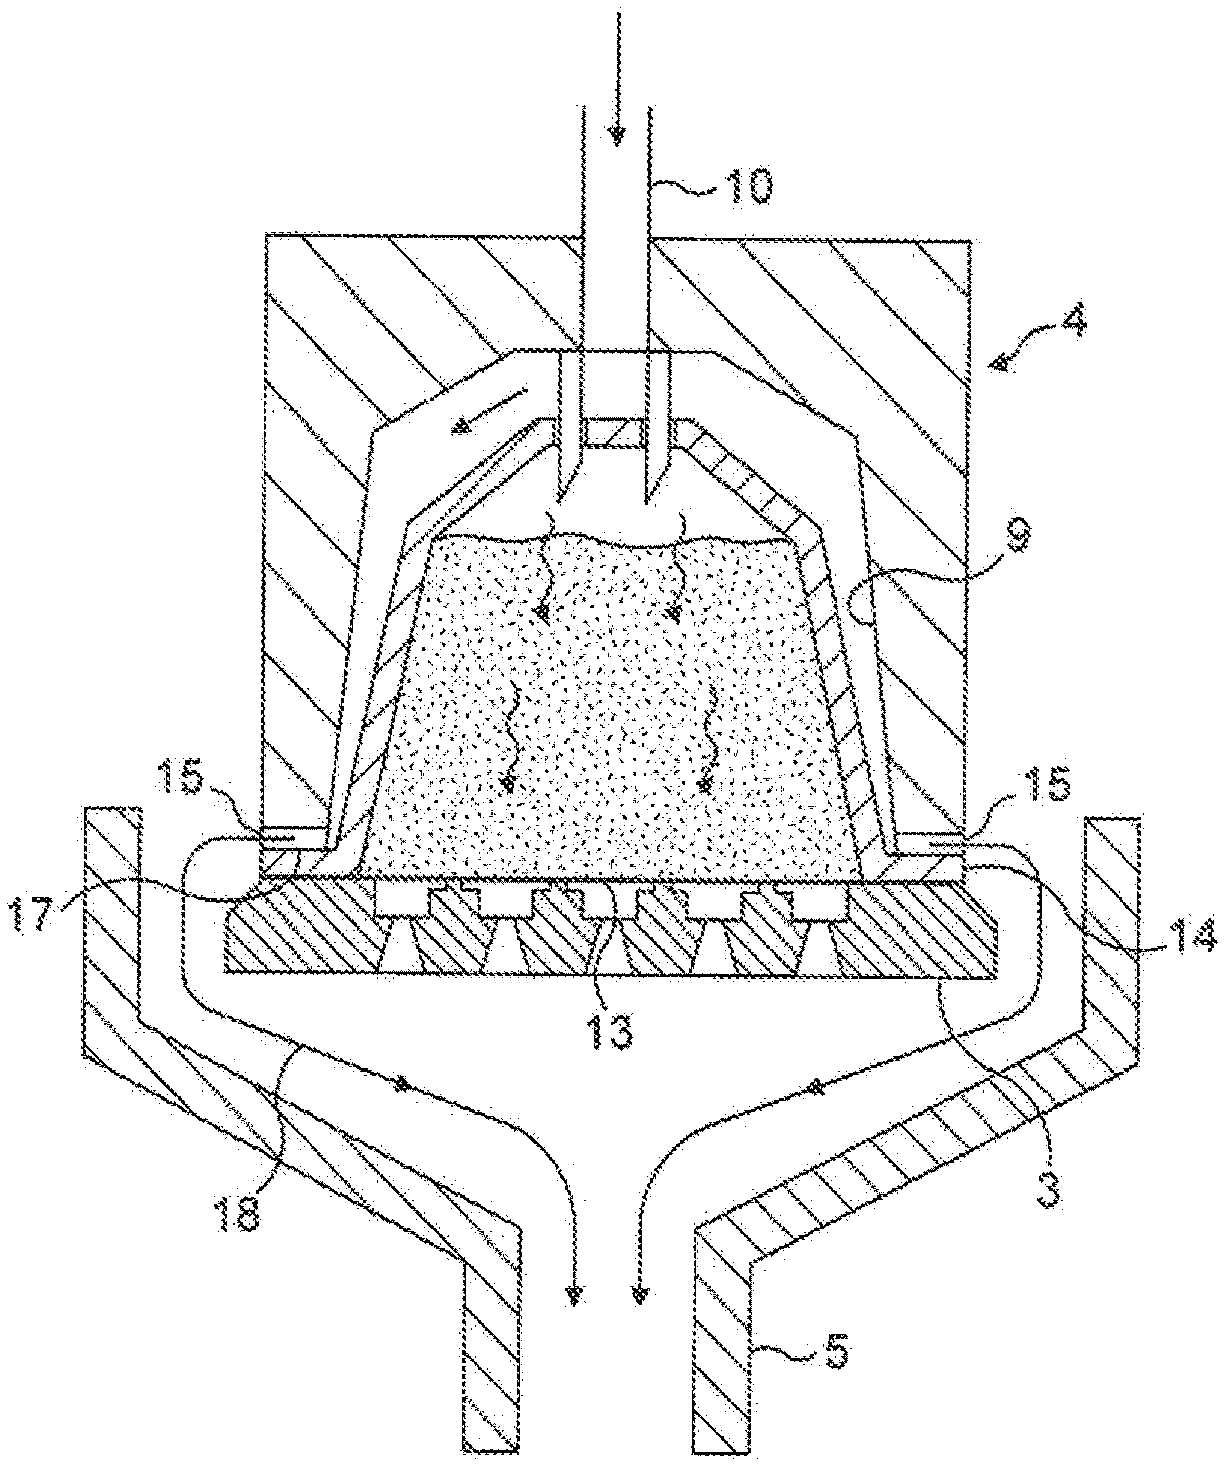 Capsule and method for preparing a beverage such as coffee from said capsule